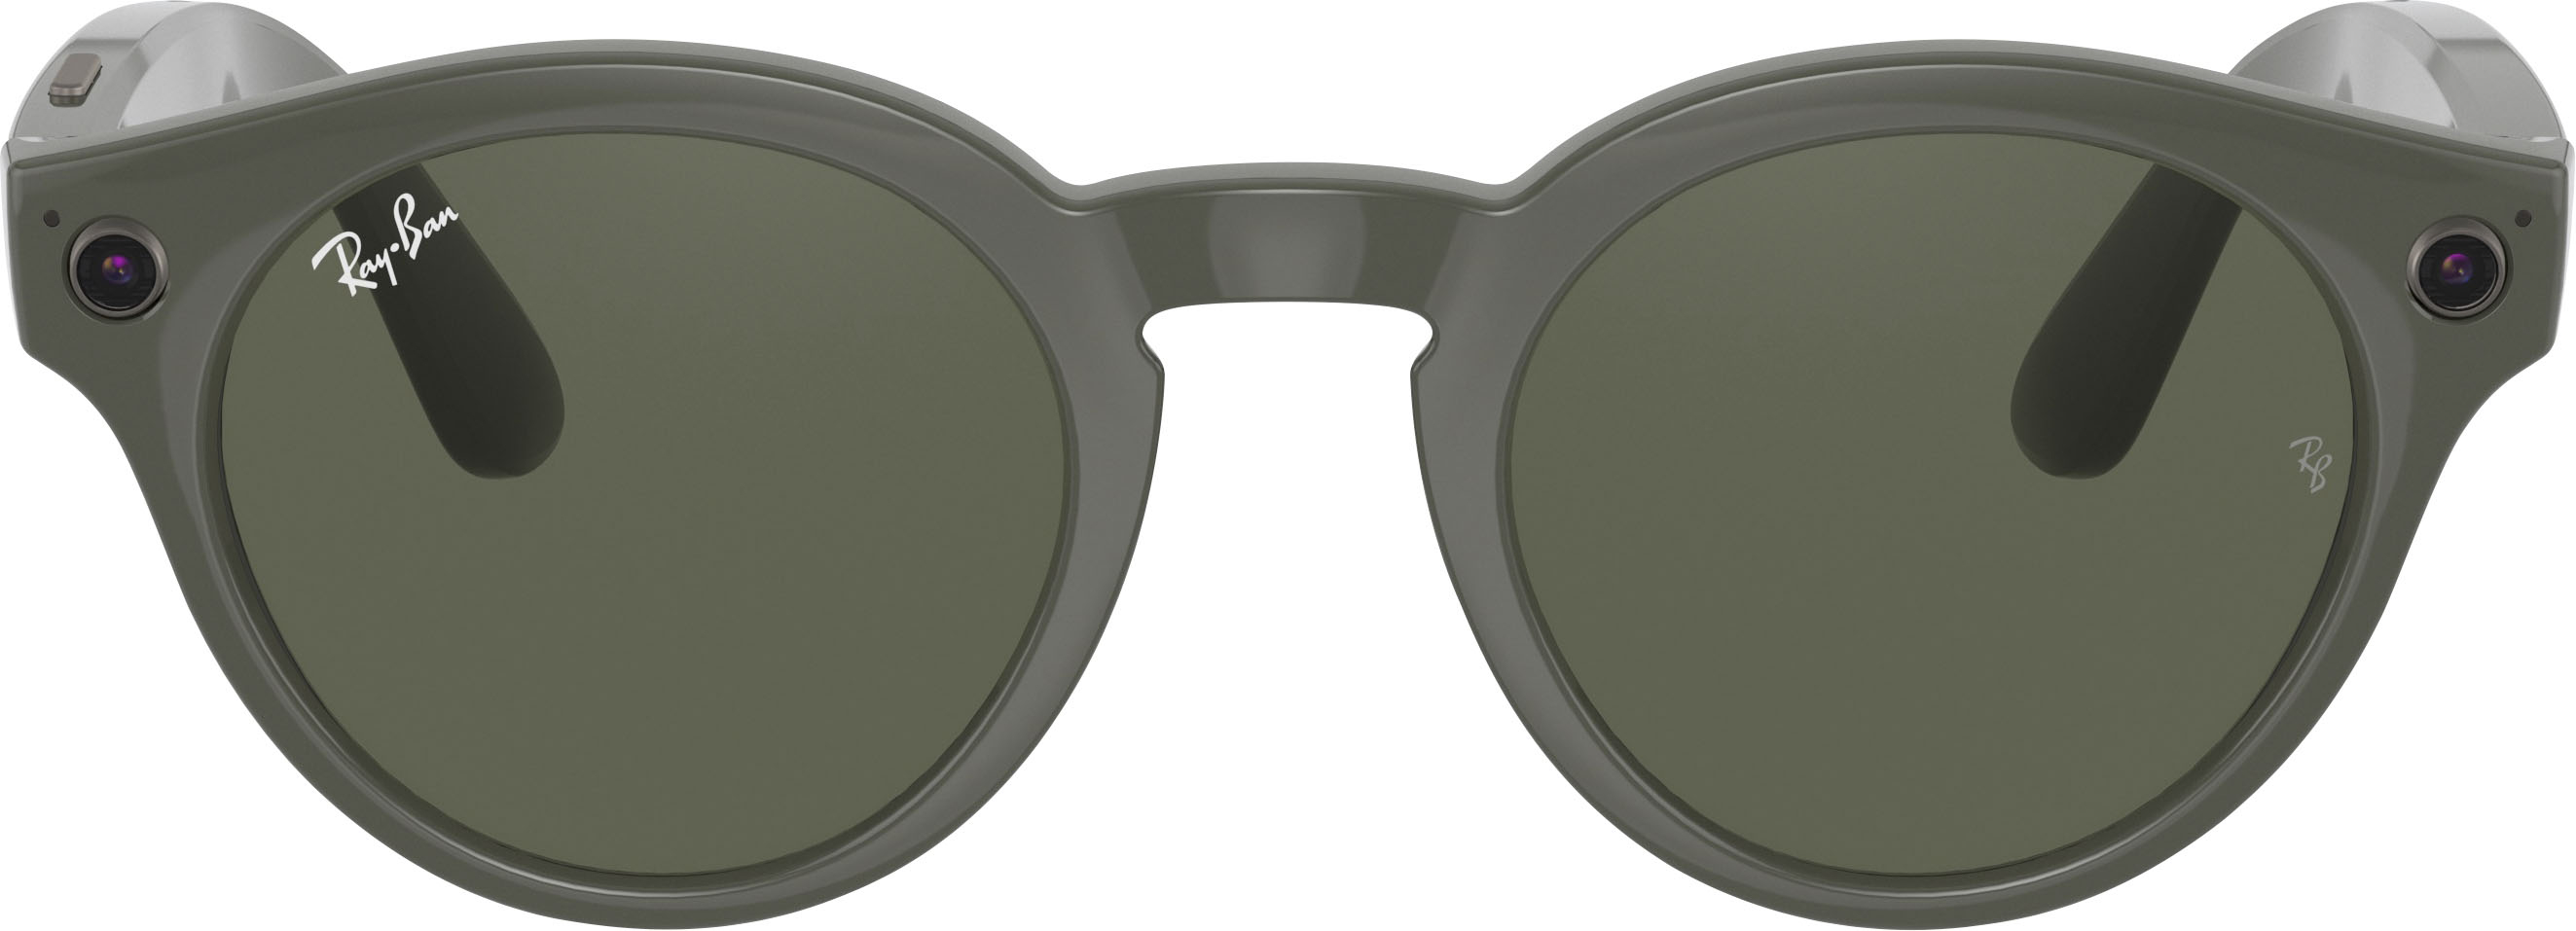 Angle View: Ray-Ban - Stories Round Smart Glasses - Shiny Olive/Transitions G-15  Green